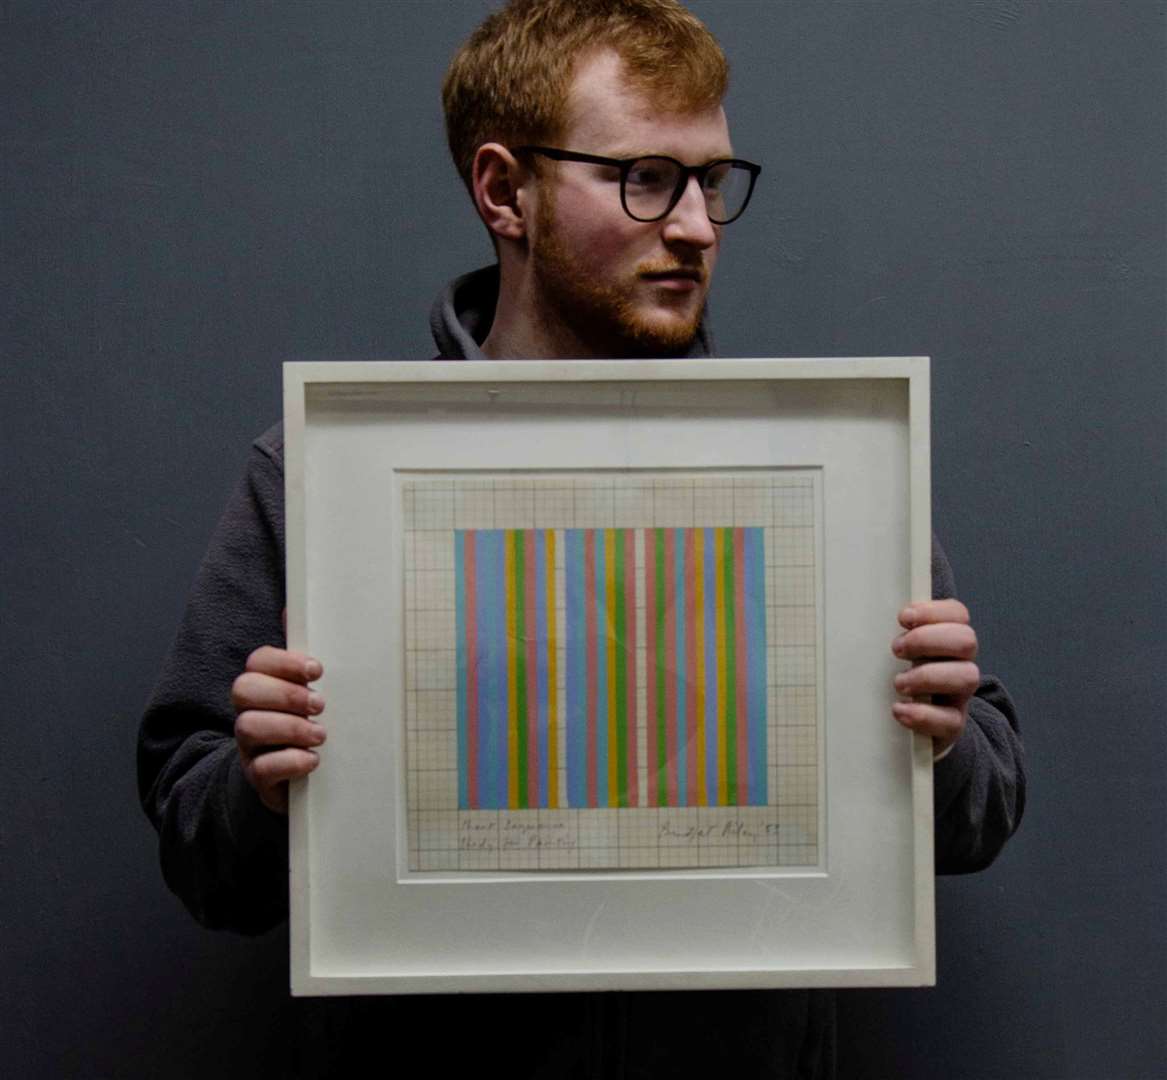 Bridget Riley's - Gouache - "Short Sequence, Study for Painting", estimated to fetch up to £30,000